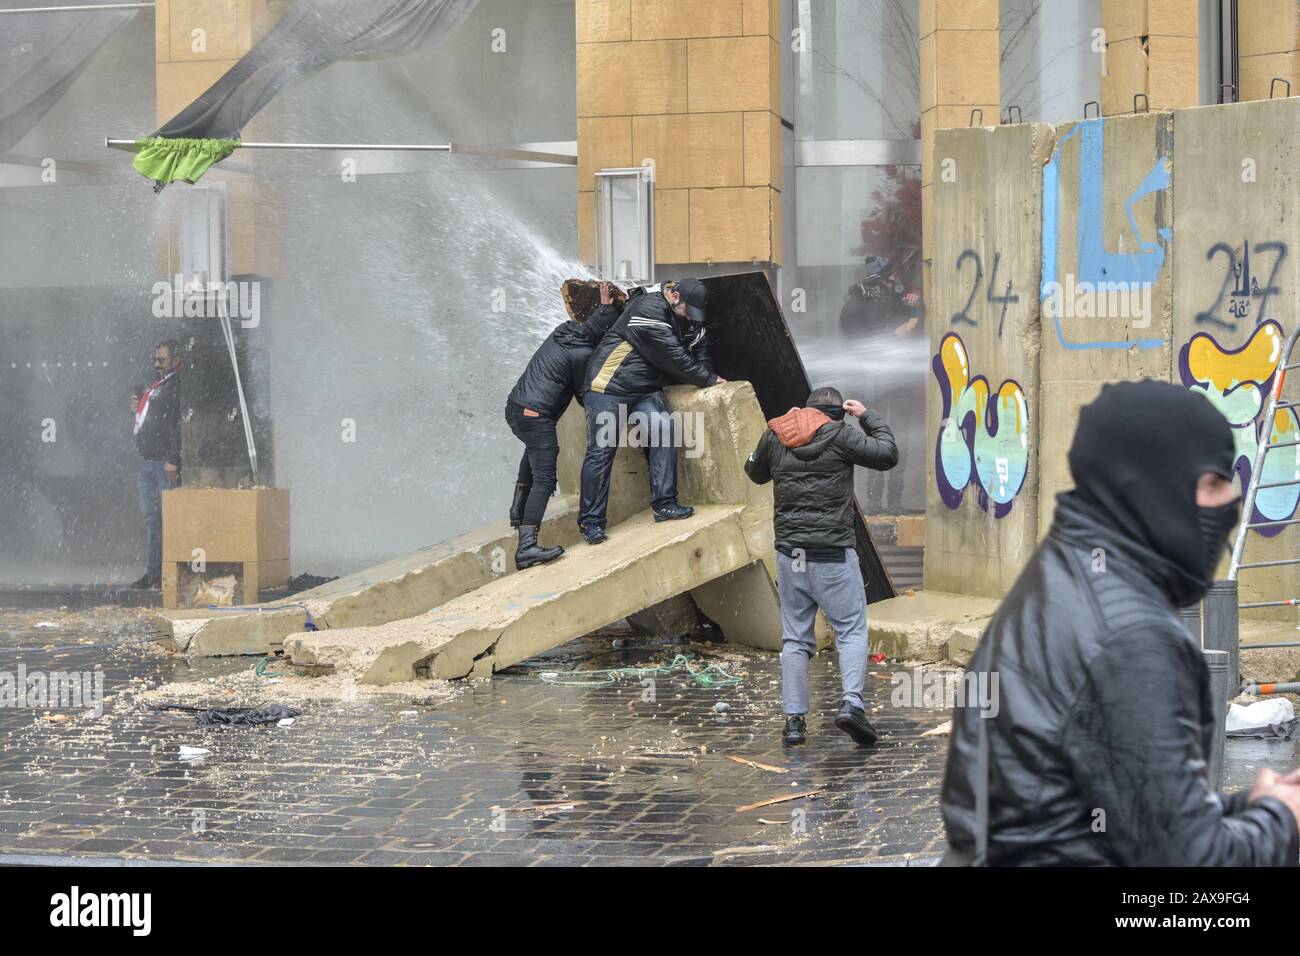 Downtown Beirut, Lebanon. 11th Feb, 2020. protesters take shelter behind building site hordings as police fire water canon at them. People gathered to protest at barriers preventing them from reaching parliament on the day of a vote of confidence in the new cabinet proposed by interim PM, Hassan Diab. Credit: Elizabeth Fitt/Alamy Live News Stock Photo